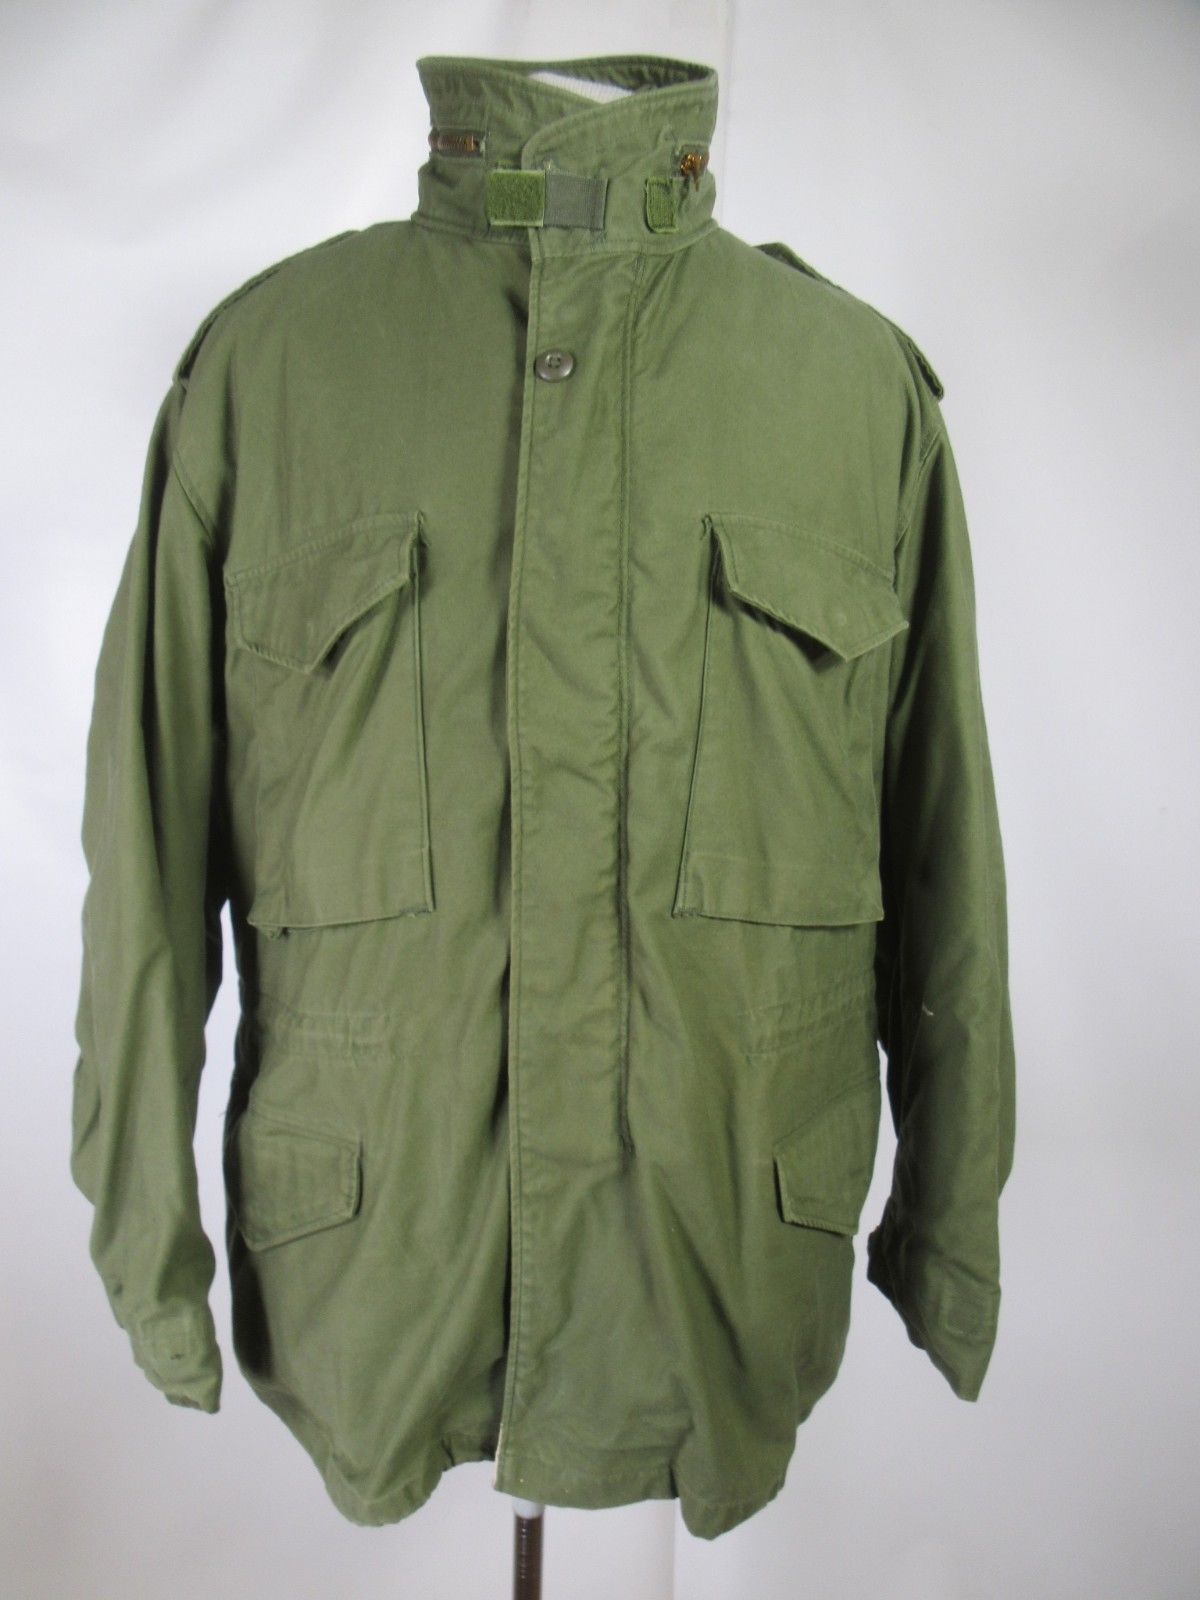 Vintage Green Army Jacket WINTER Coat Authentic Military Issue 1960-19 ...